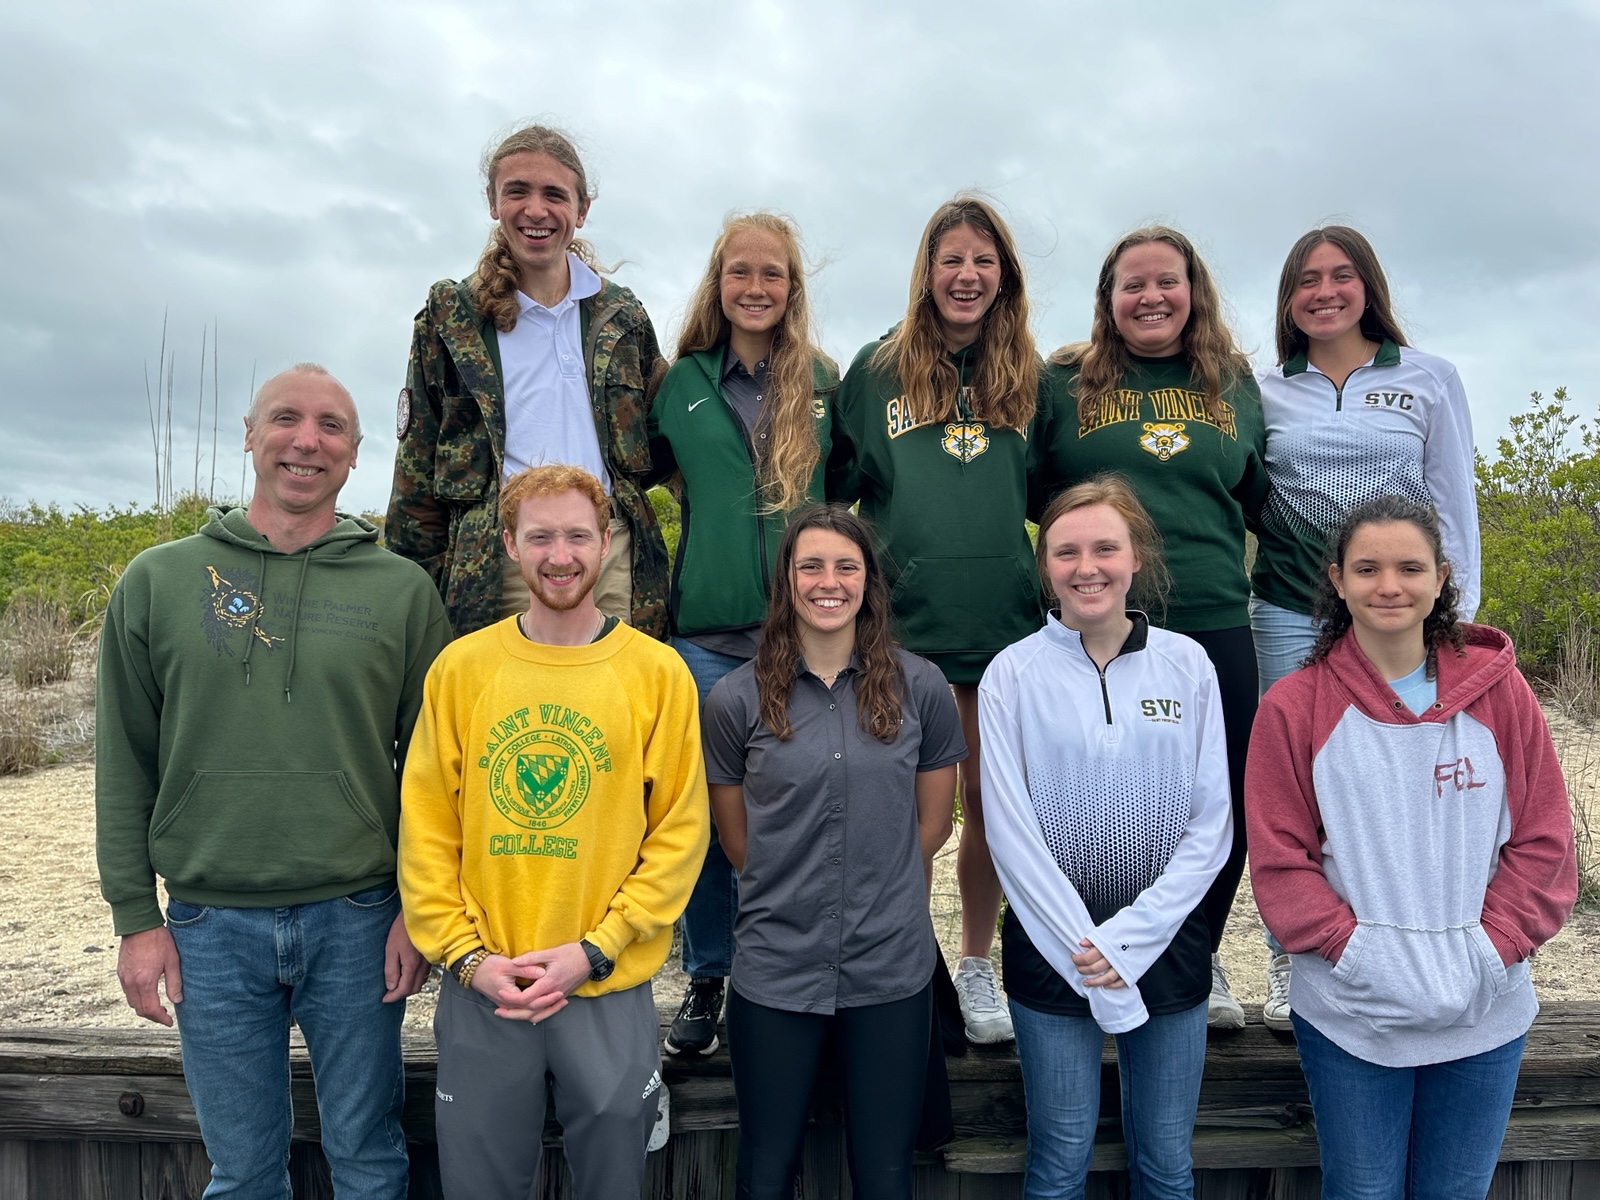 SVC’s team poses for a group photo during the competition.  Top row, from left: Jonah Weaver; Kristen Prince; Cassandra Lanza; Arianne Winkleblech, C'20; and Grace Scoville